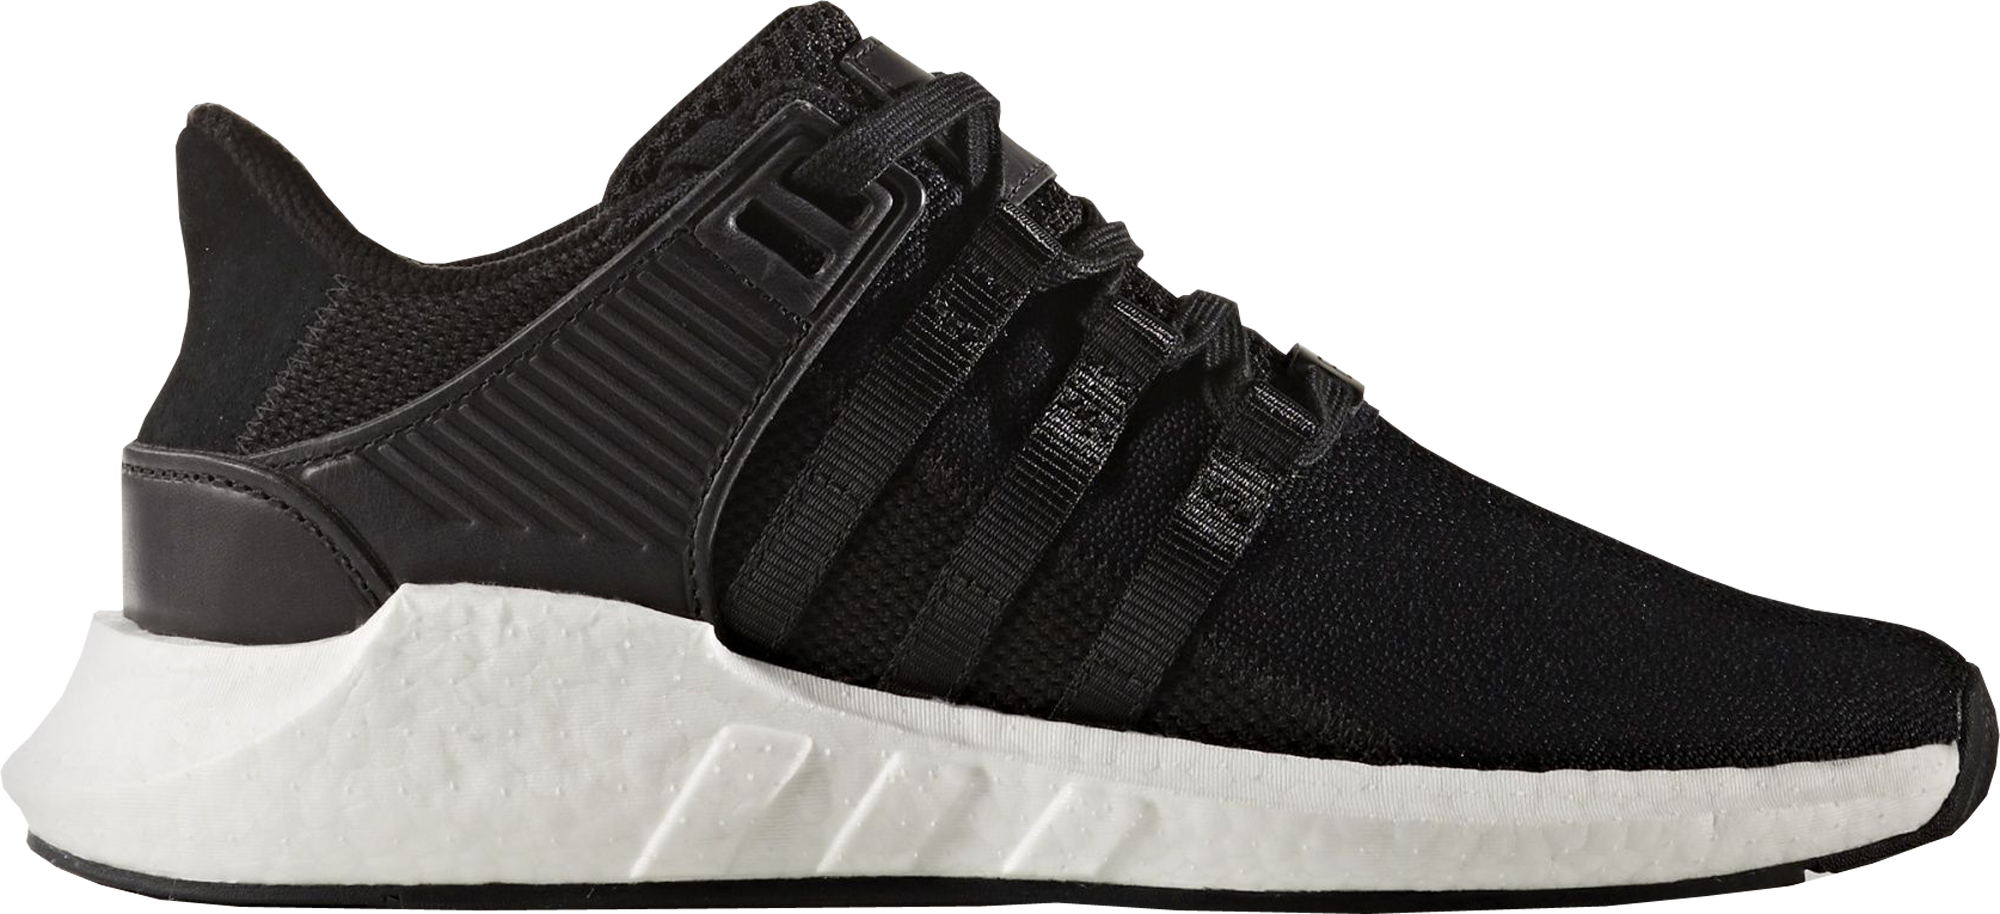 adidas eqt 93 for sale